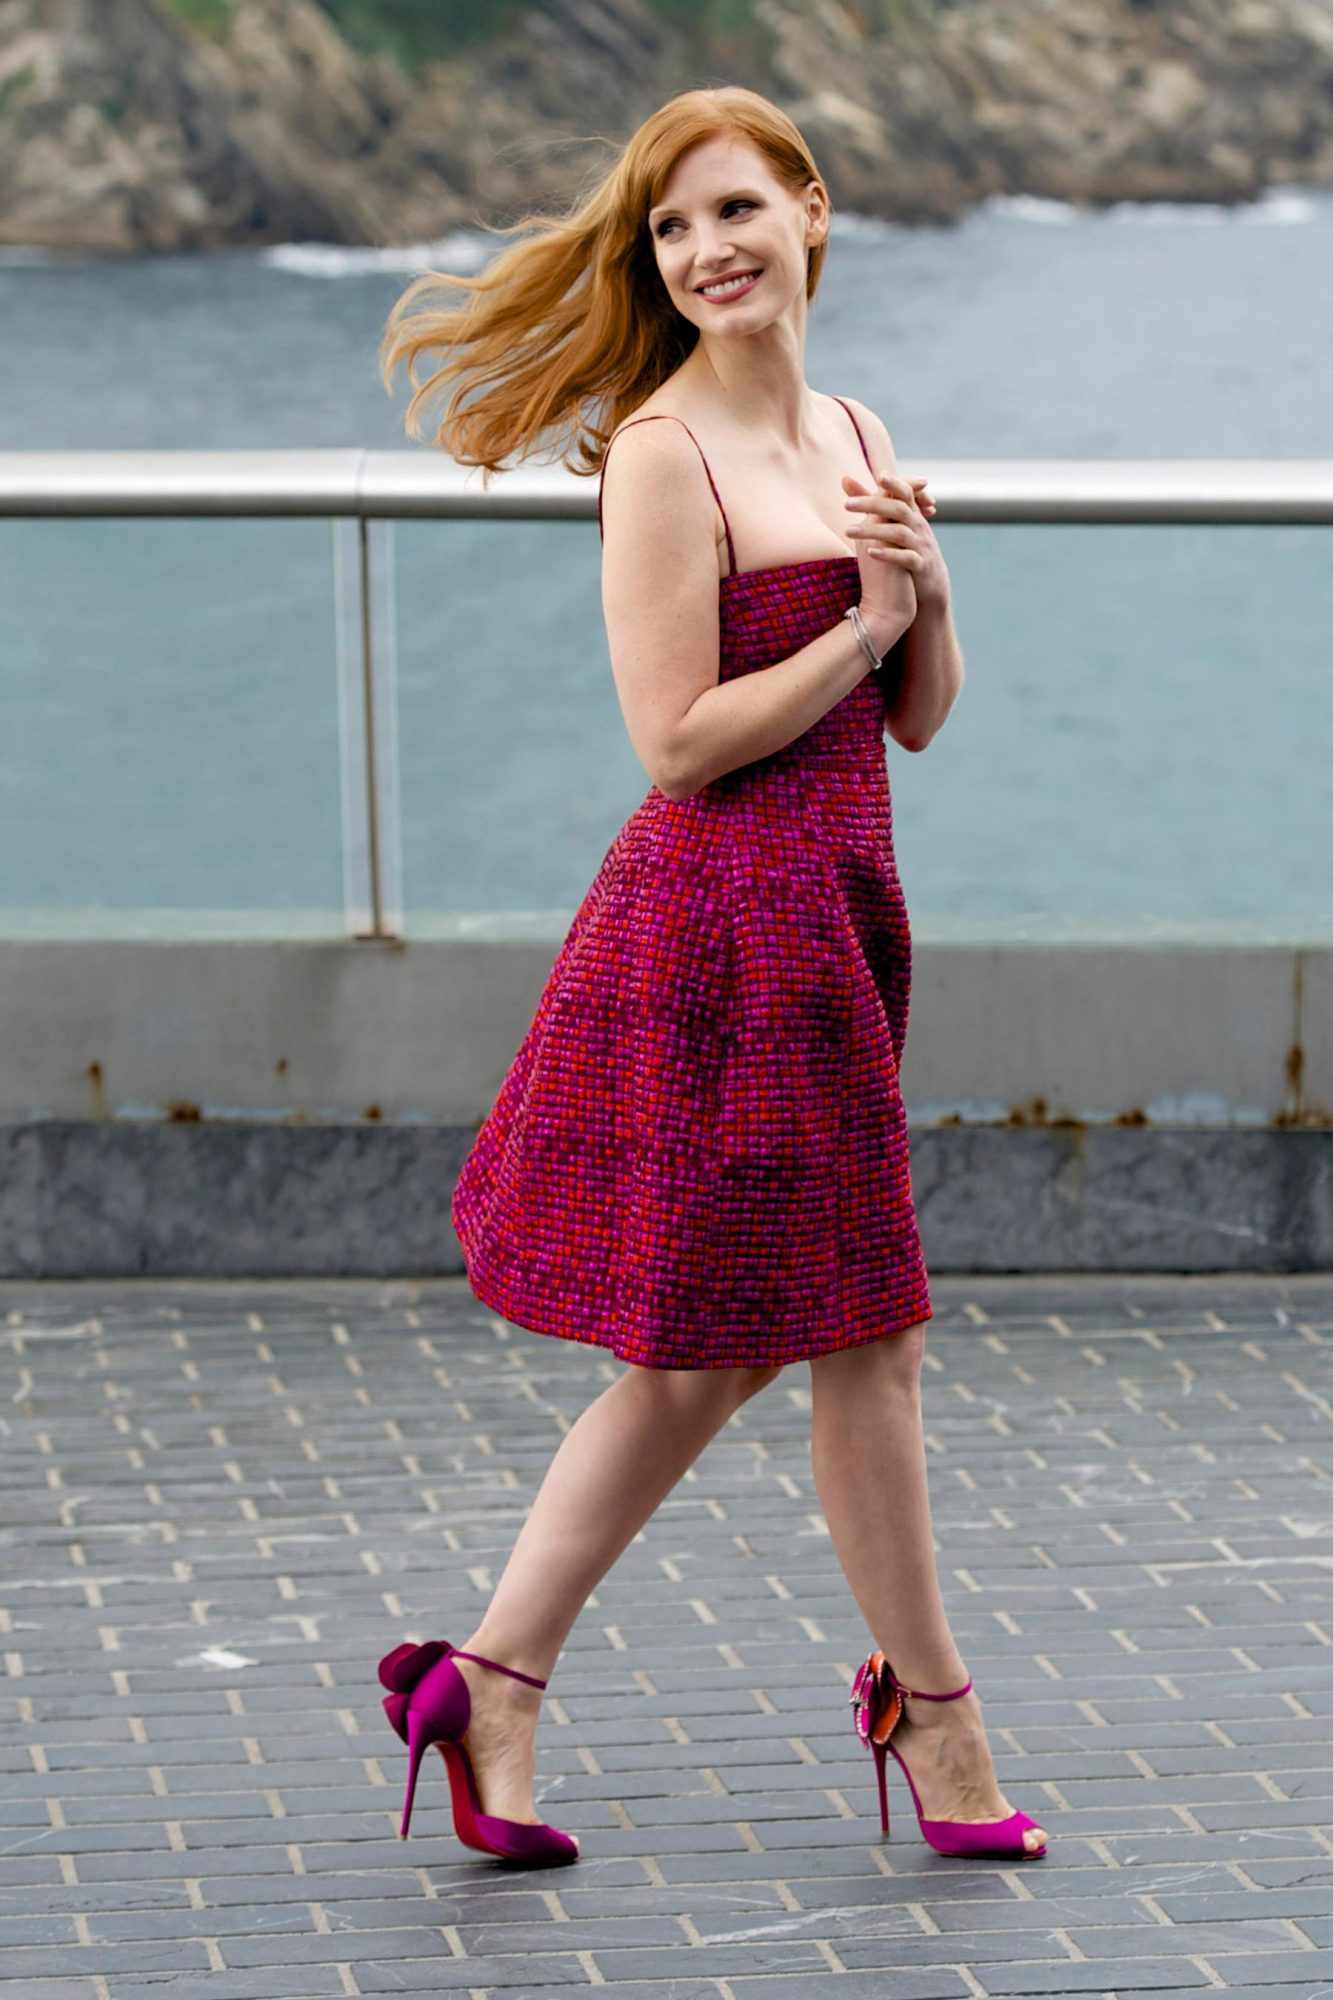 Jessica Chastain at the Photocall For The Disappearance of Eleanor Rigby&nbsp;at the 62nd San Sebastian International Film Festival on September 23, 2014&nbsp;